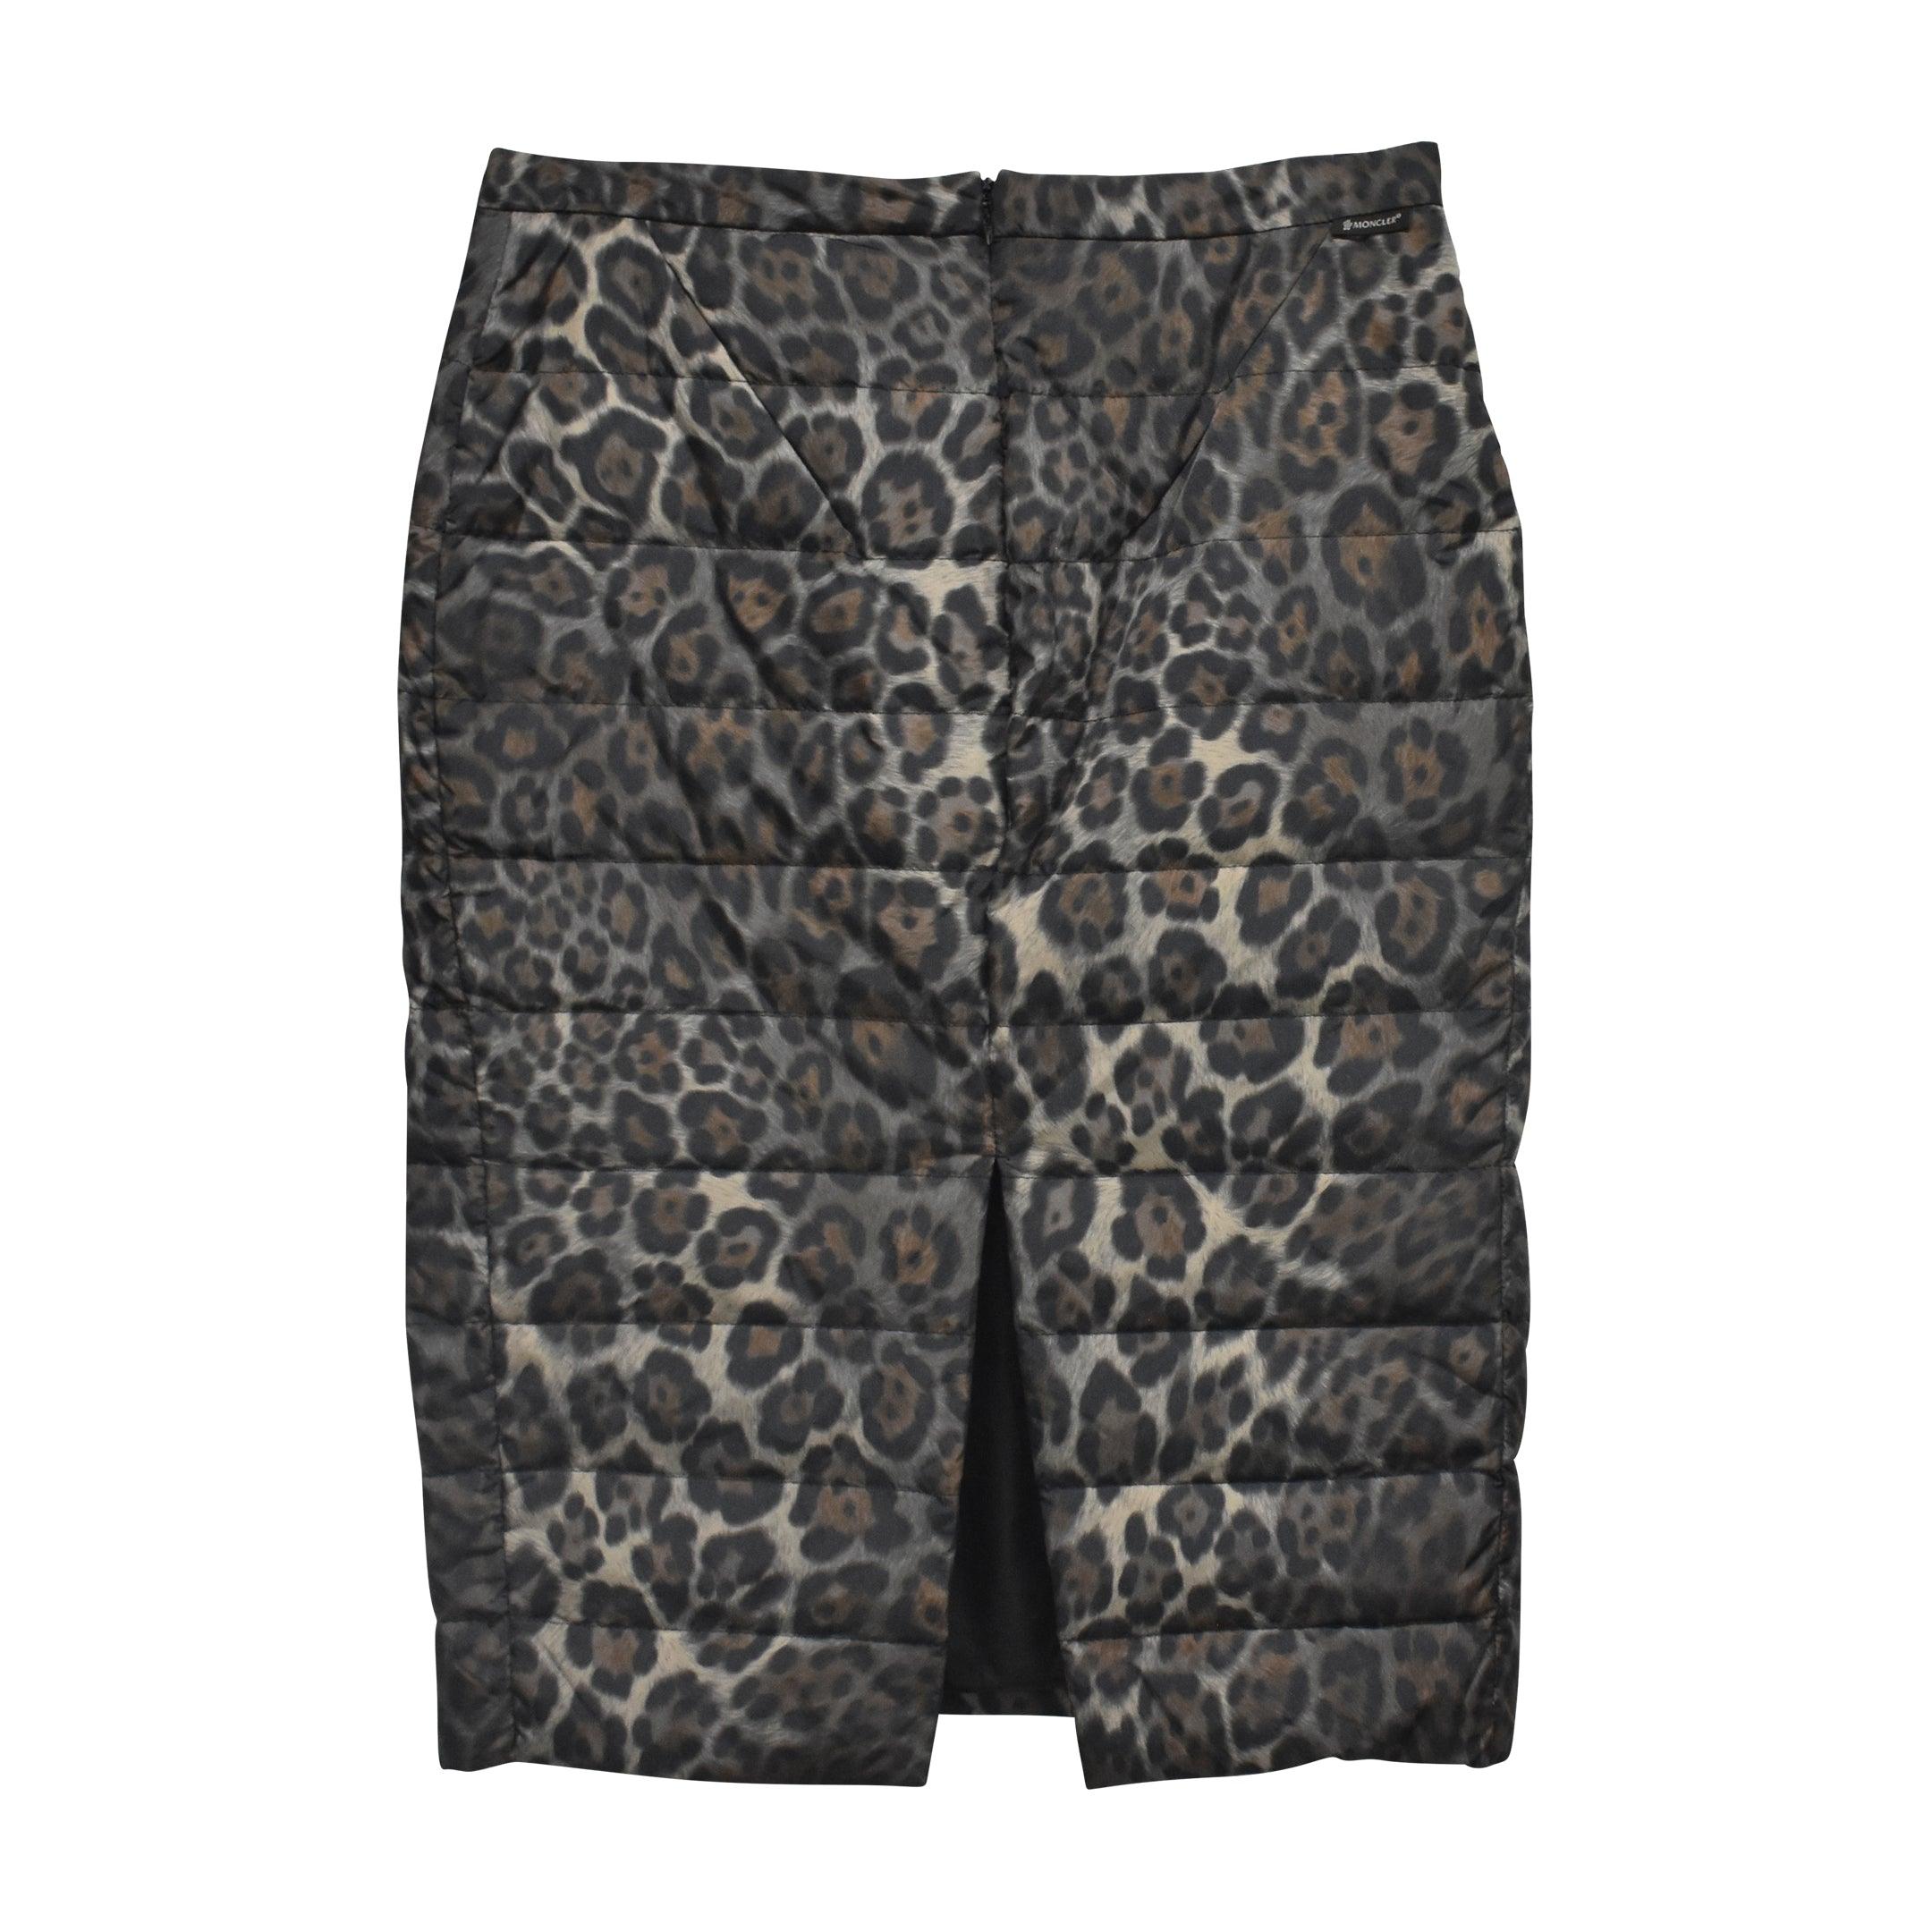 Moncler Skirt - Women's 42 - Fashionably Yours